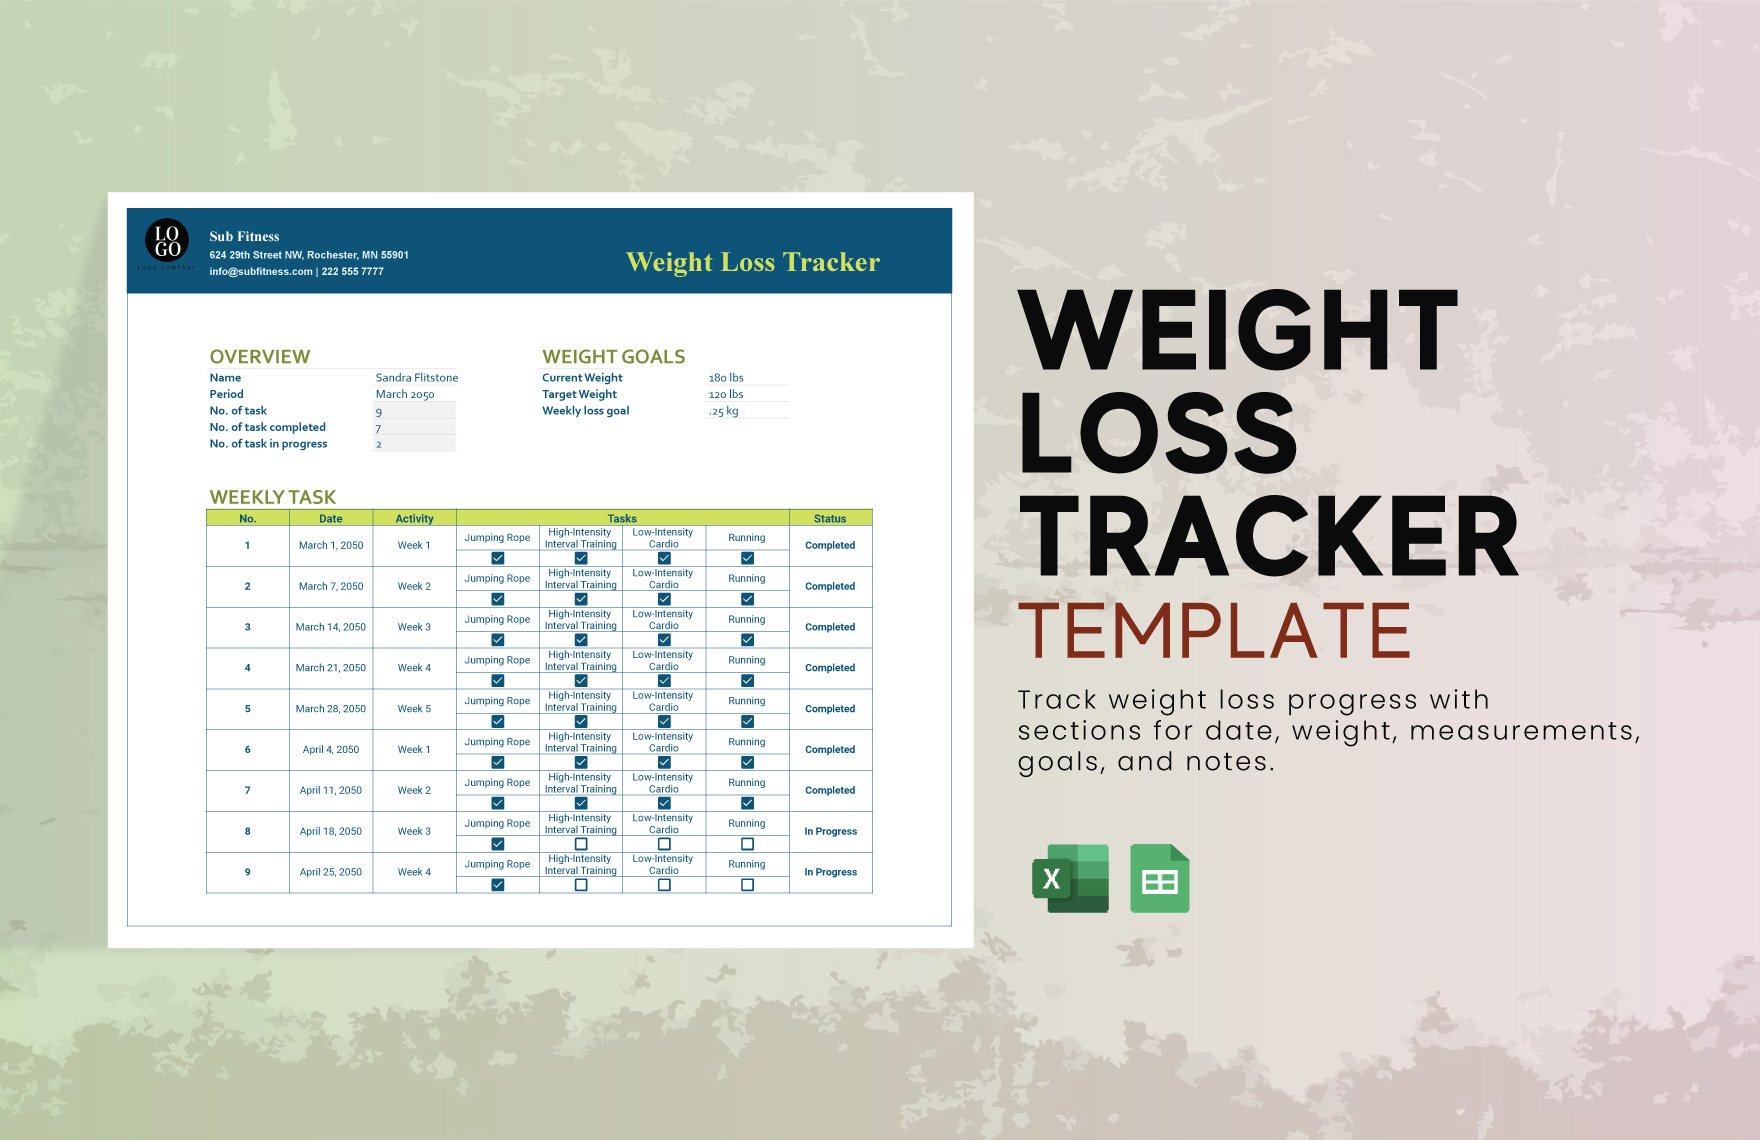 Weight Loss Tracker Template in Excel, Google Sheets